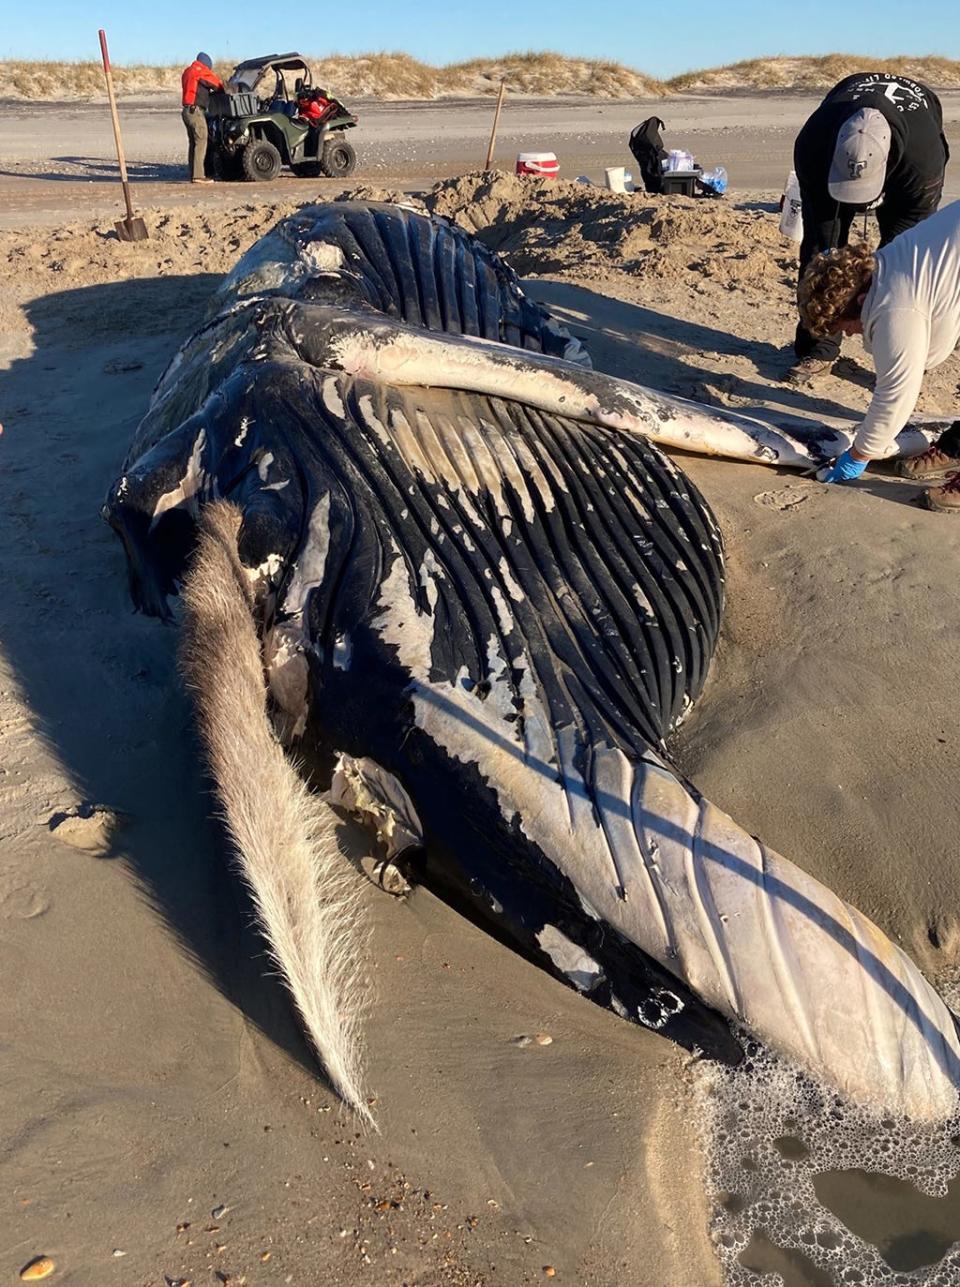 A 31-foot humpback whale washed up at Cape Lookout National Seashore on Dec. 28.

Image credit: NPS photo